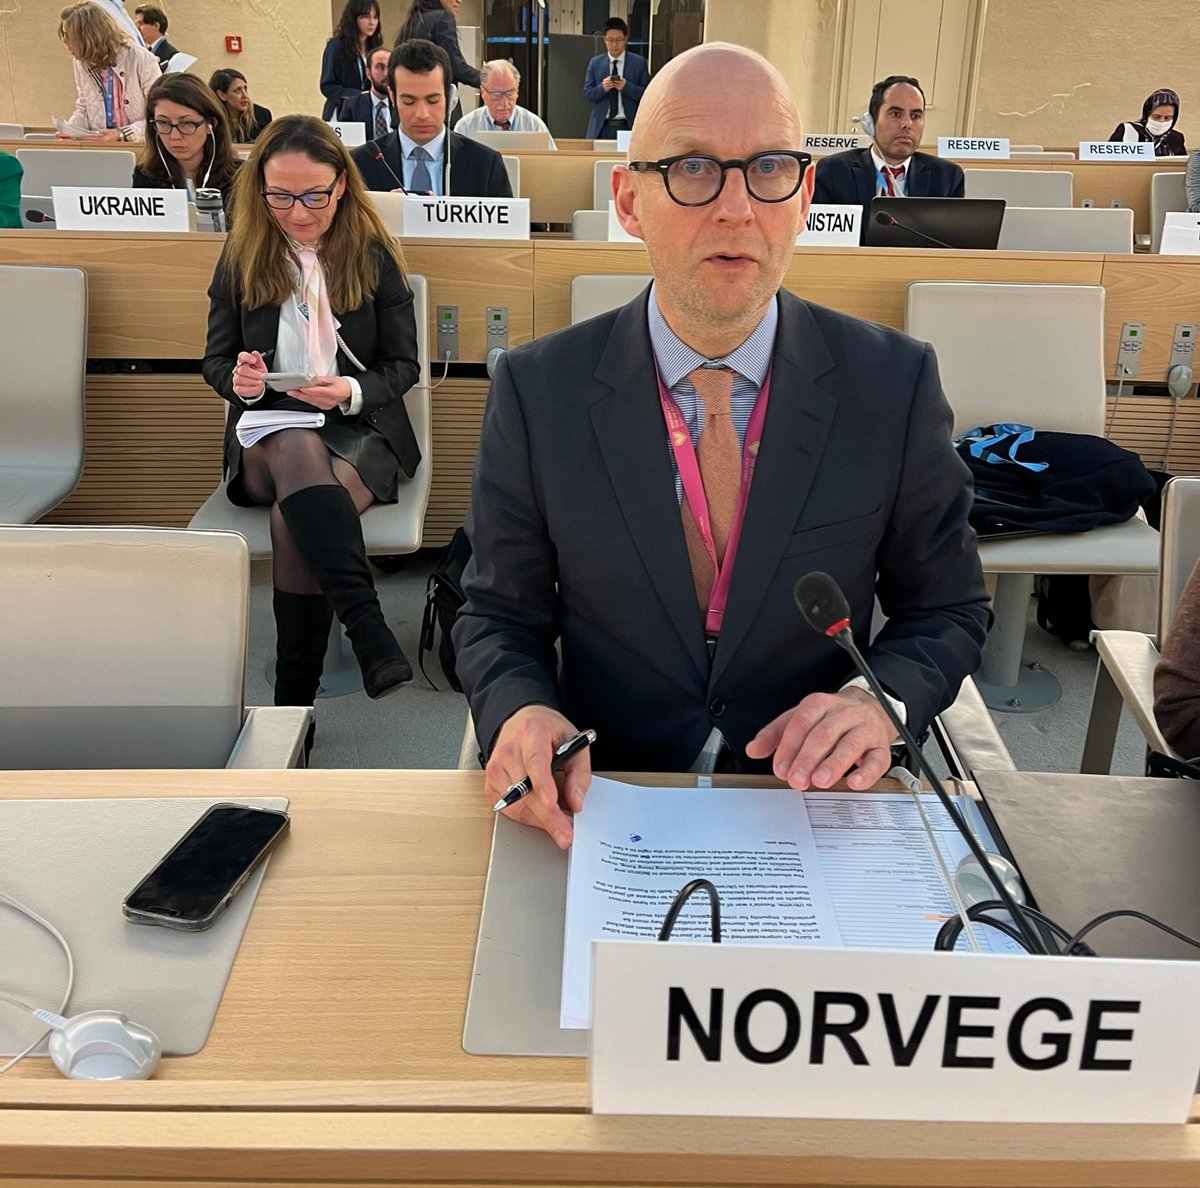 #HRC55: Freedom of expression and access to information is critical to shed light on #HumanRights violations and abuse and secure accountability⚖️. 🇳🇴 urges: 👉Journalists must be protected 👉Impunity for crimes against journalists must end Full stmnt.: bit.ly/3TrMQwt